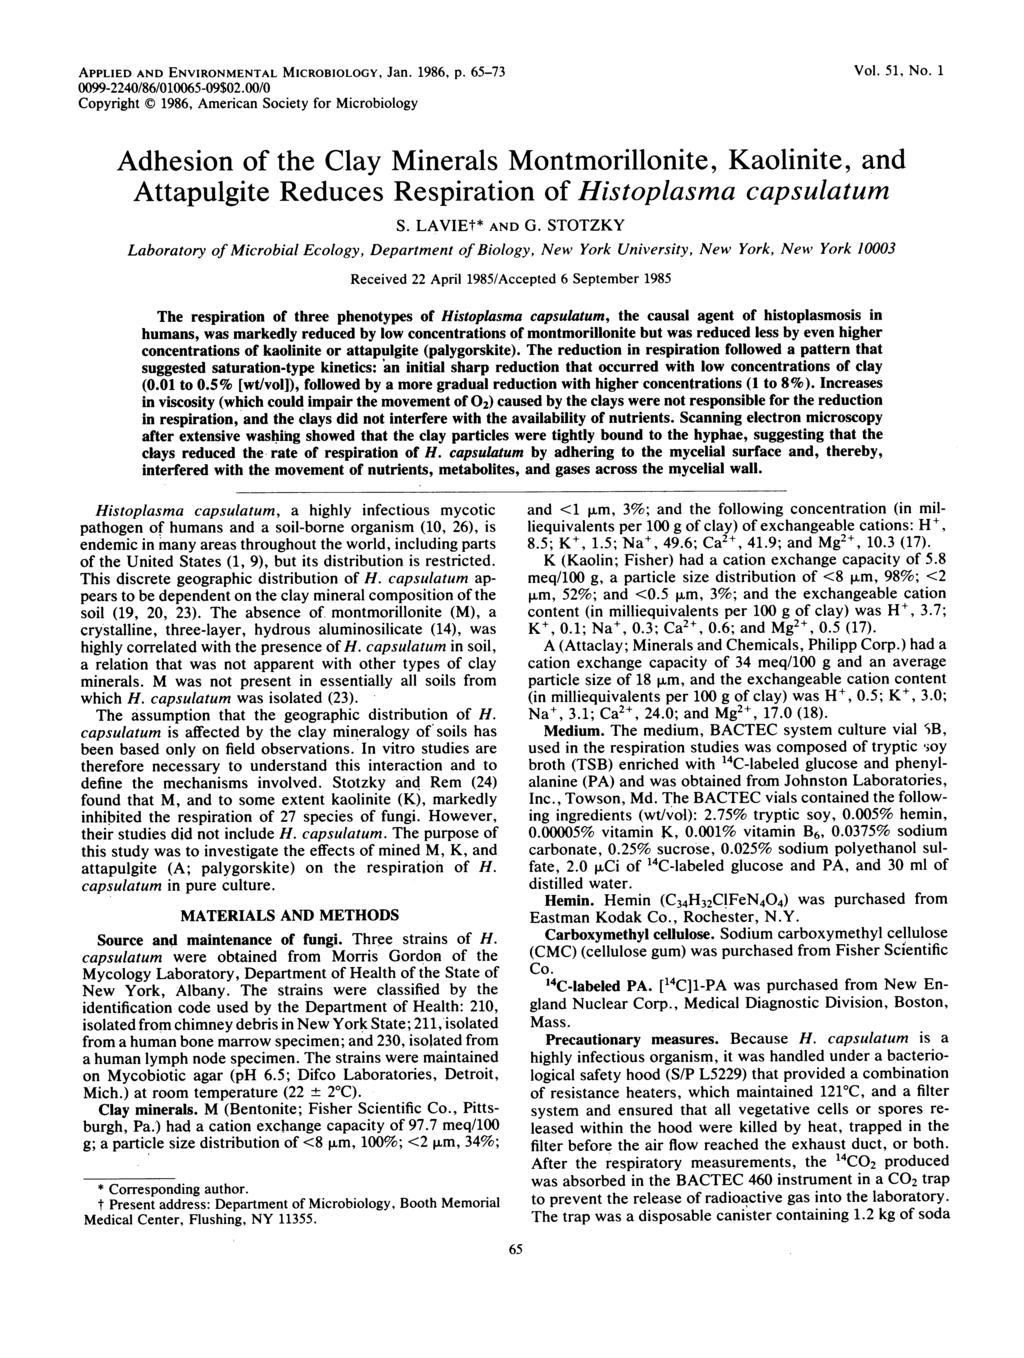 APPLIED AND ENVIRONMENTAL MICROBIOLOGY, Jan. 1986, p. 65-73 99-224/86/165-9$2./ Copyright C) 1986, American Society for Microbiology Vol. 51, No.